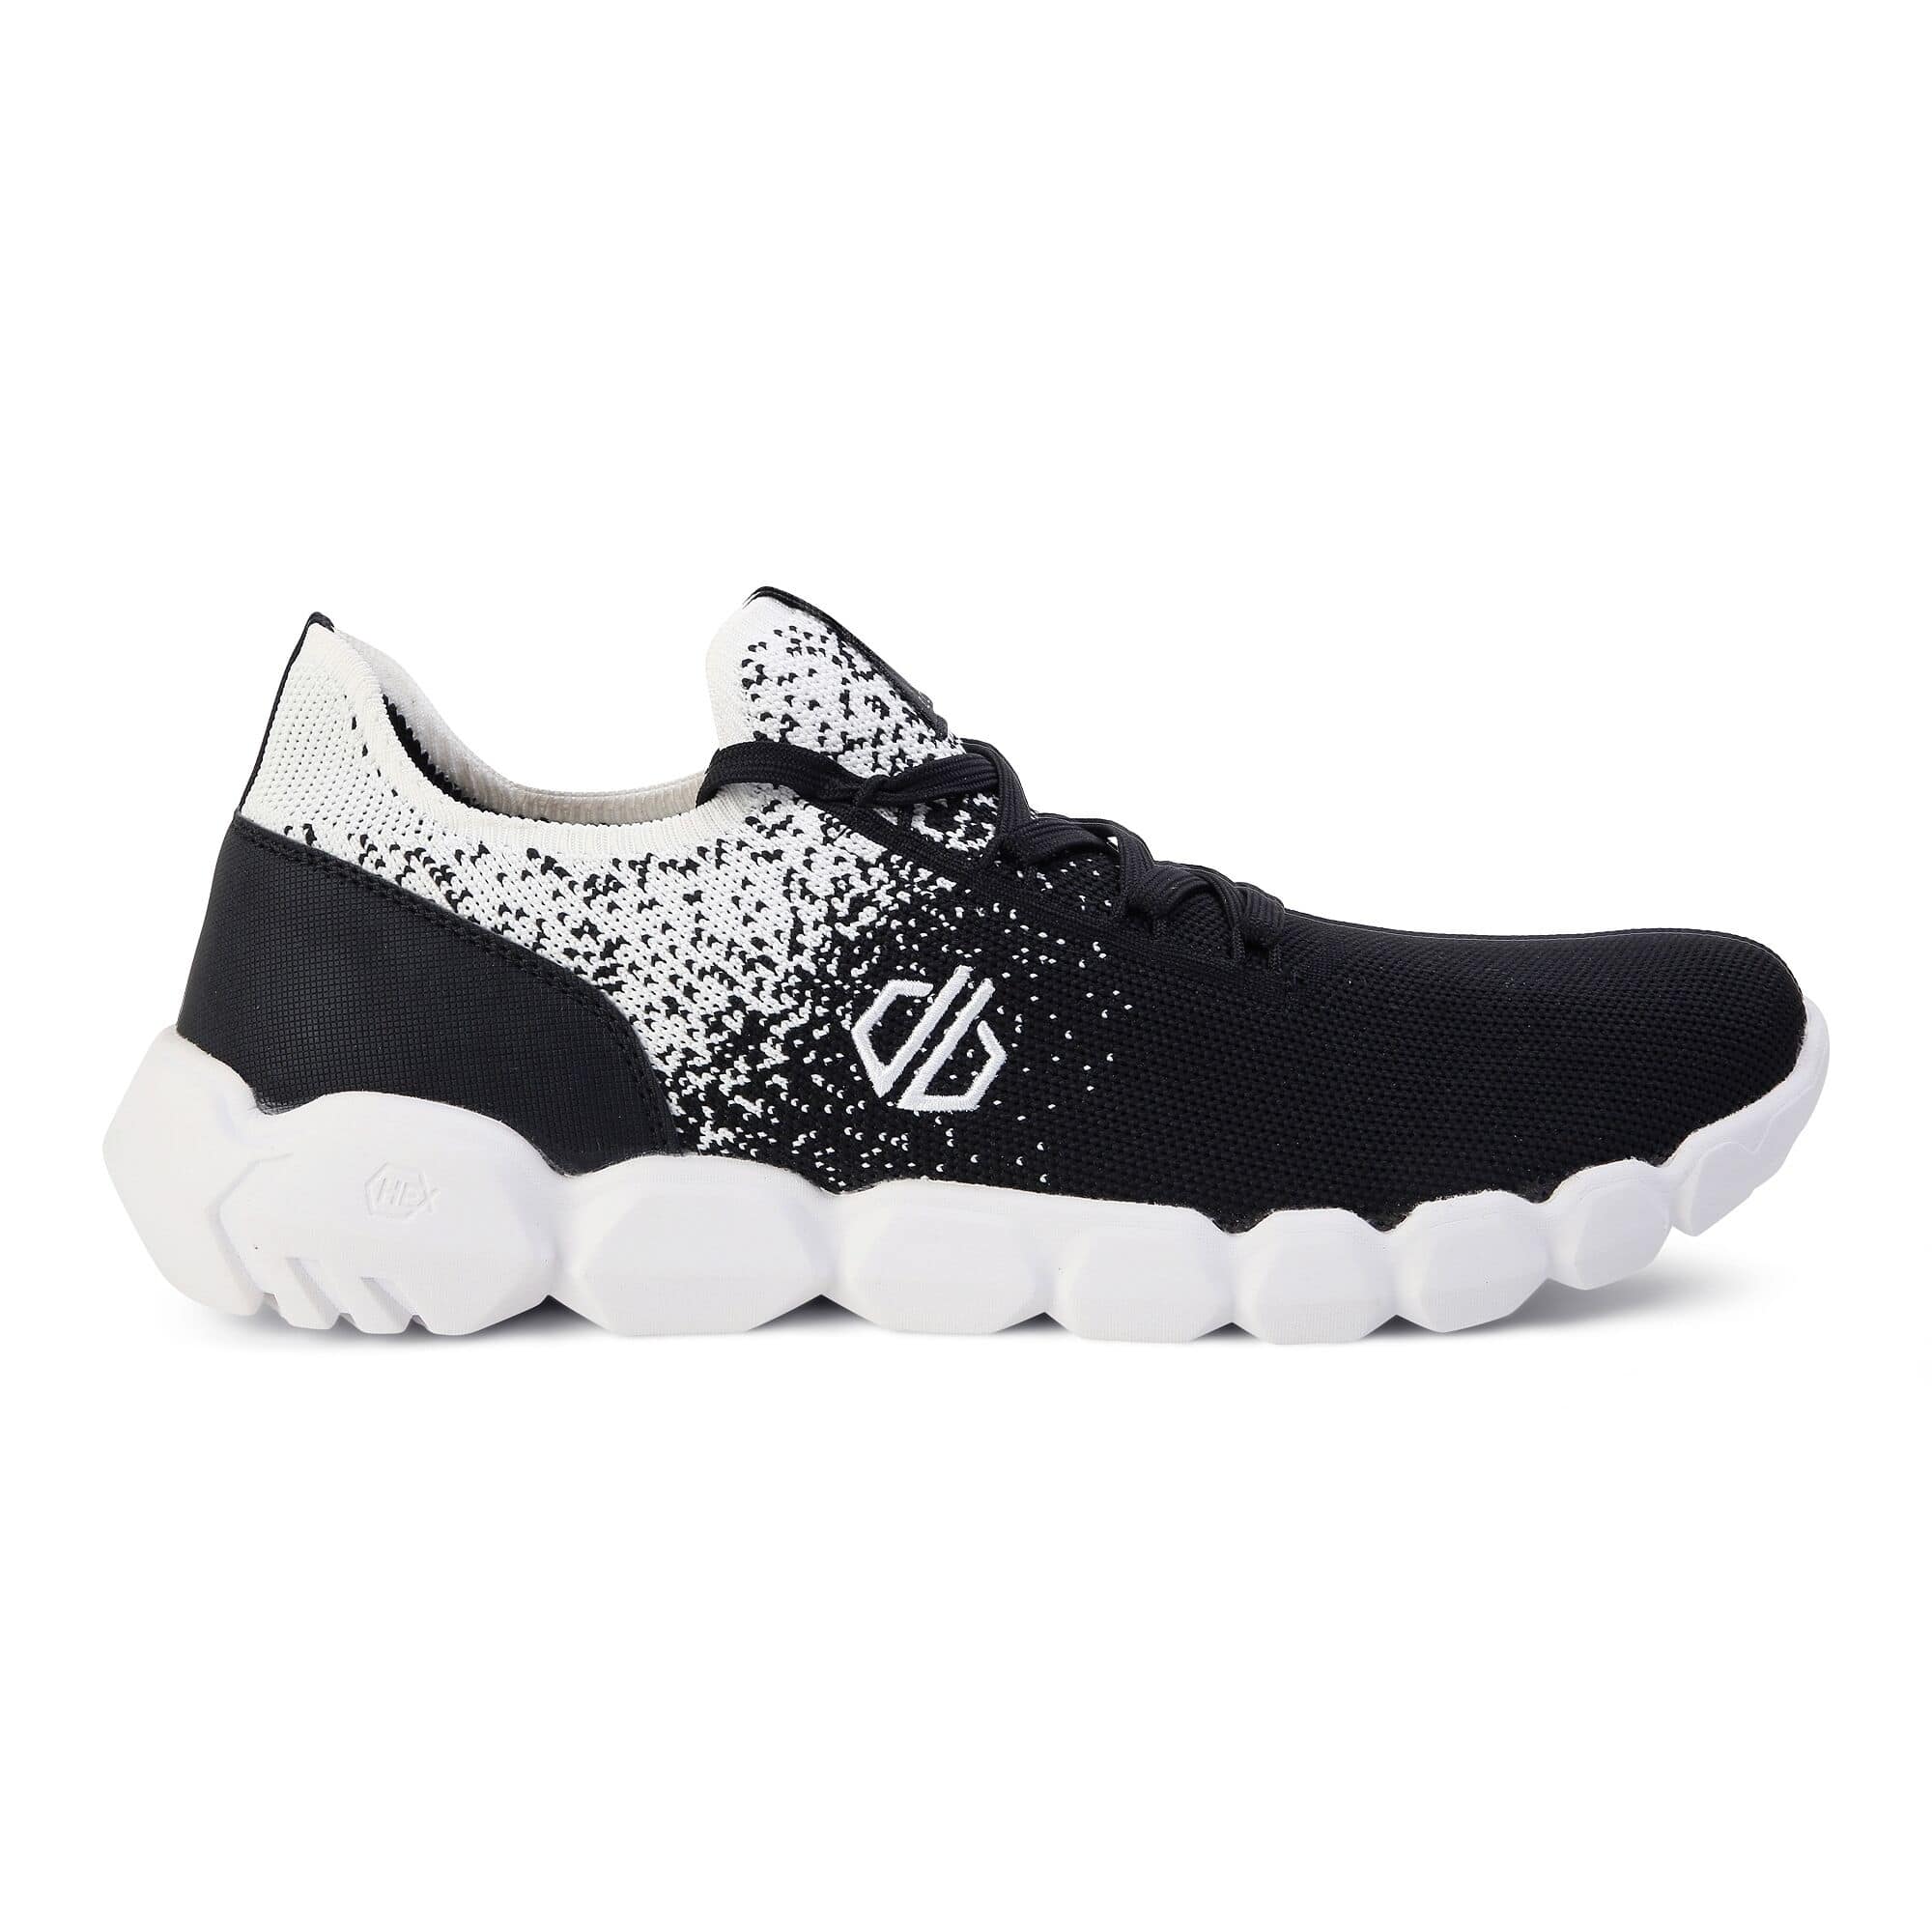 Dare 2b - Men's Hex-At Recycled Trainers | Black White